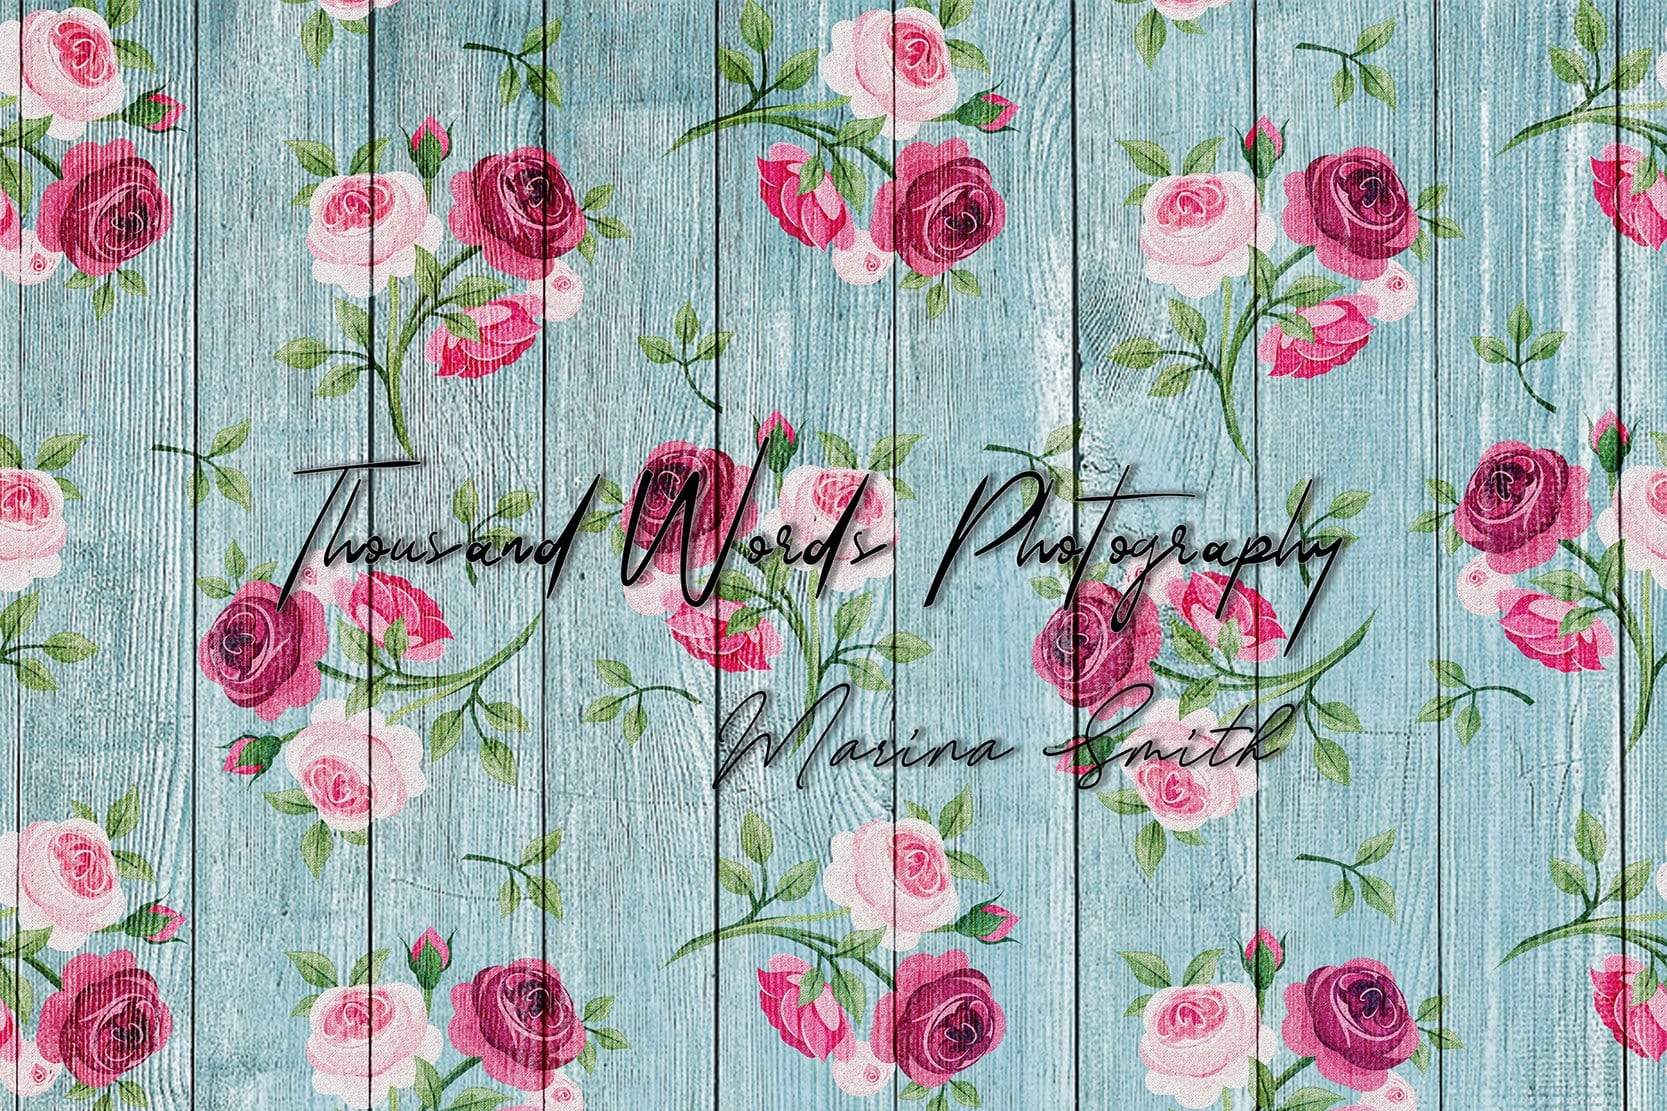 Kate Floral Vintage Roses Blue Wood Backdrop for Photography Designed by Marina Smith